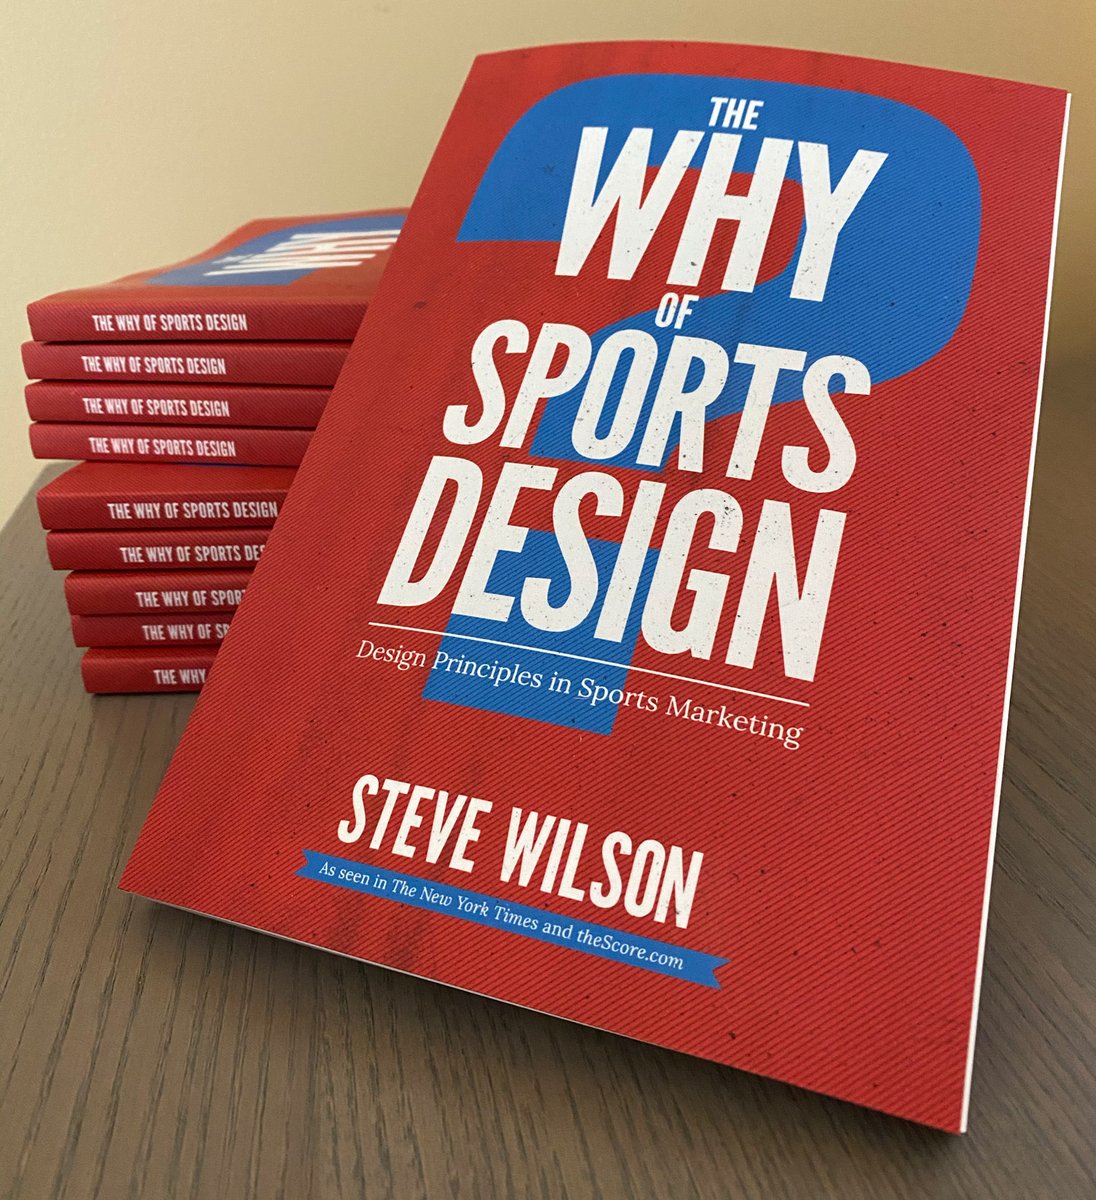 🚨Y'ALL! 🚨I have a new shipment of books in! Avoid Lord Bezos' Amazon and order your paperback or e-book copy directly from my site (Sorry...paperback is US orders only on my site).
scorecreative.net/shop/

#books #smsports #design